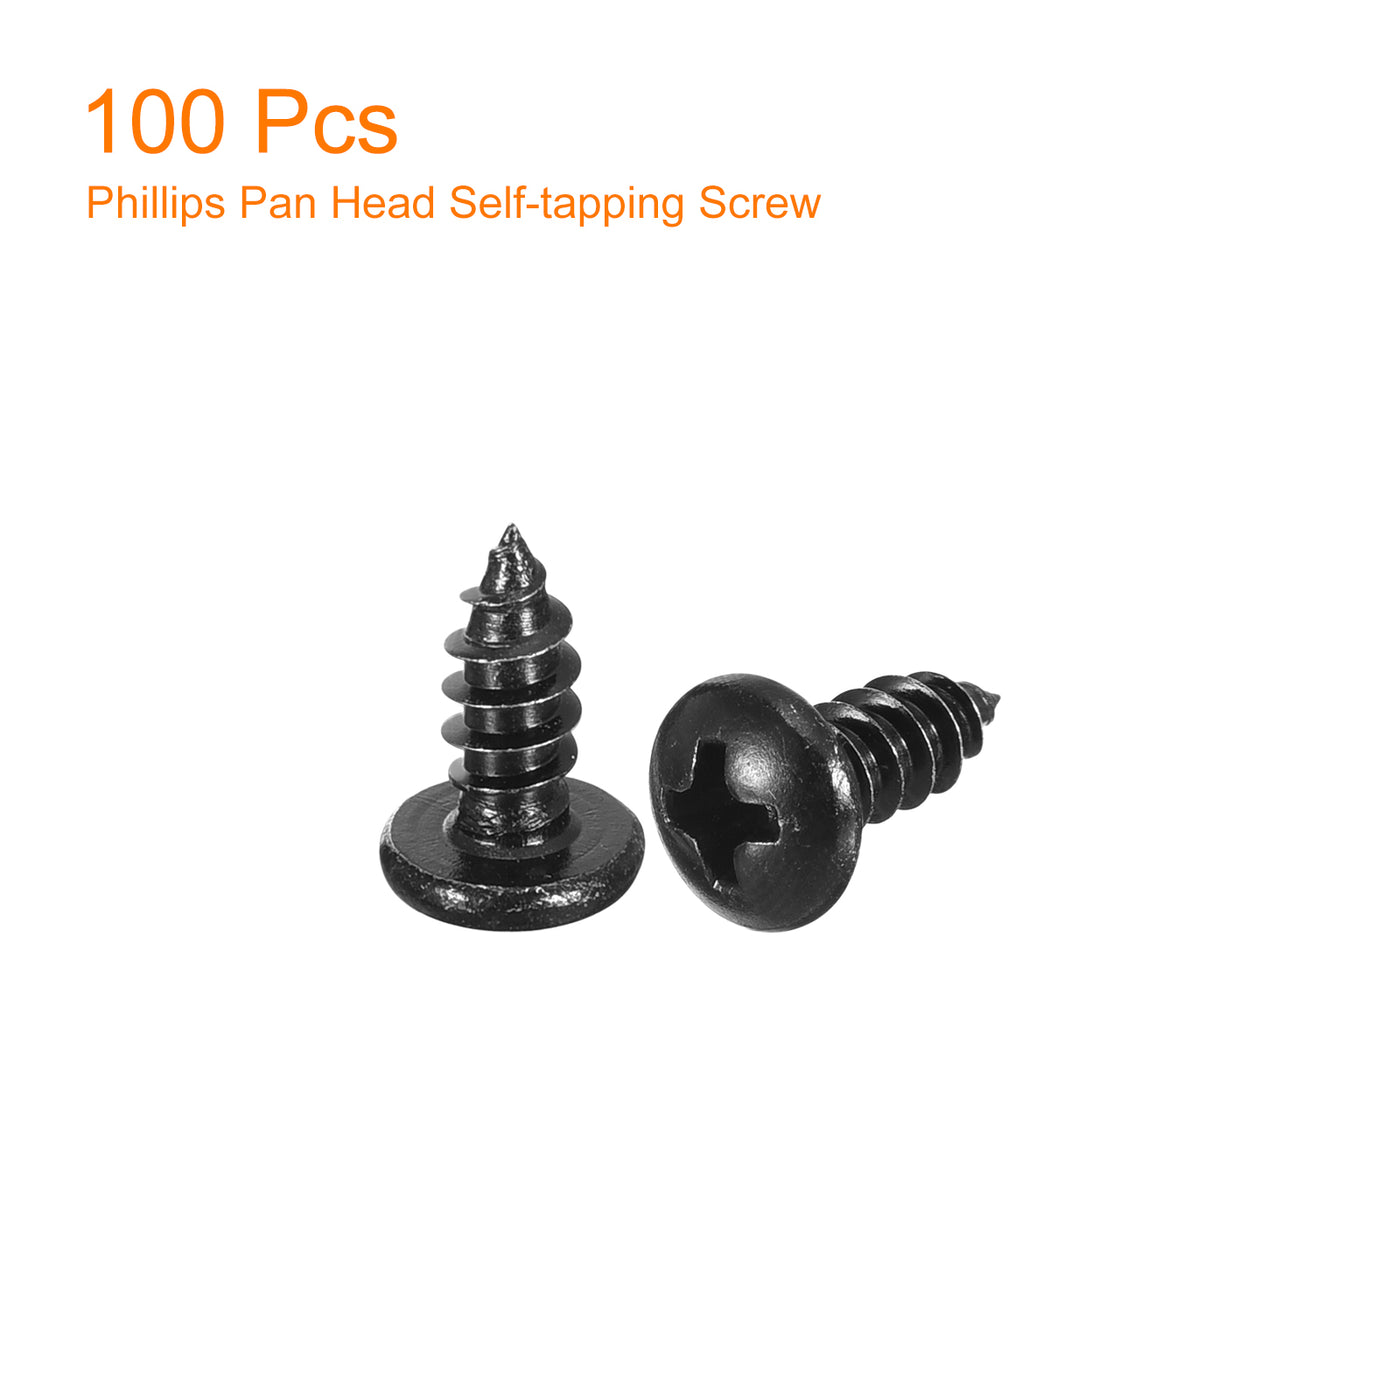 uxcell Uxcell 4mm x 10mm Phillips Pan Head Self-tapping Screw, 100pcs - 304 Stainless Steel Round Head Wood Screw Full Thread (Black)